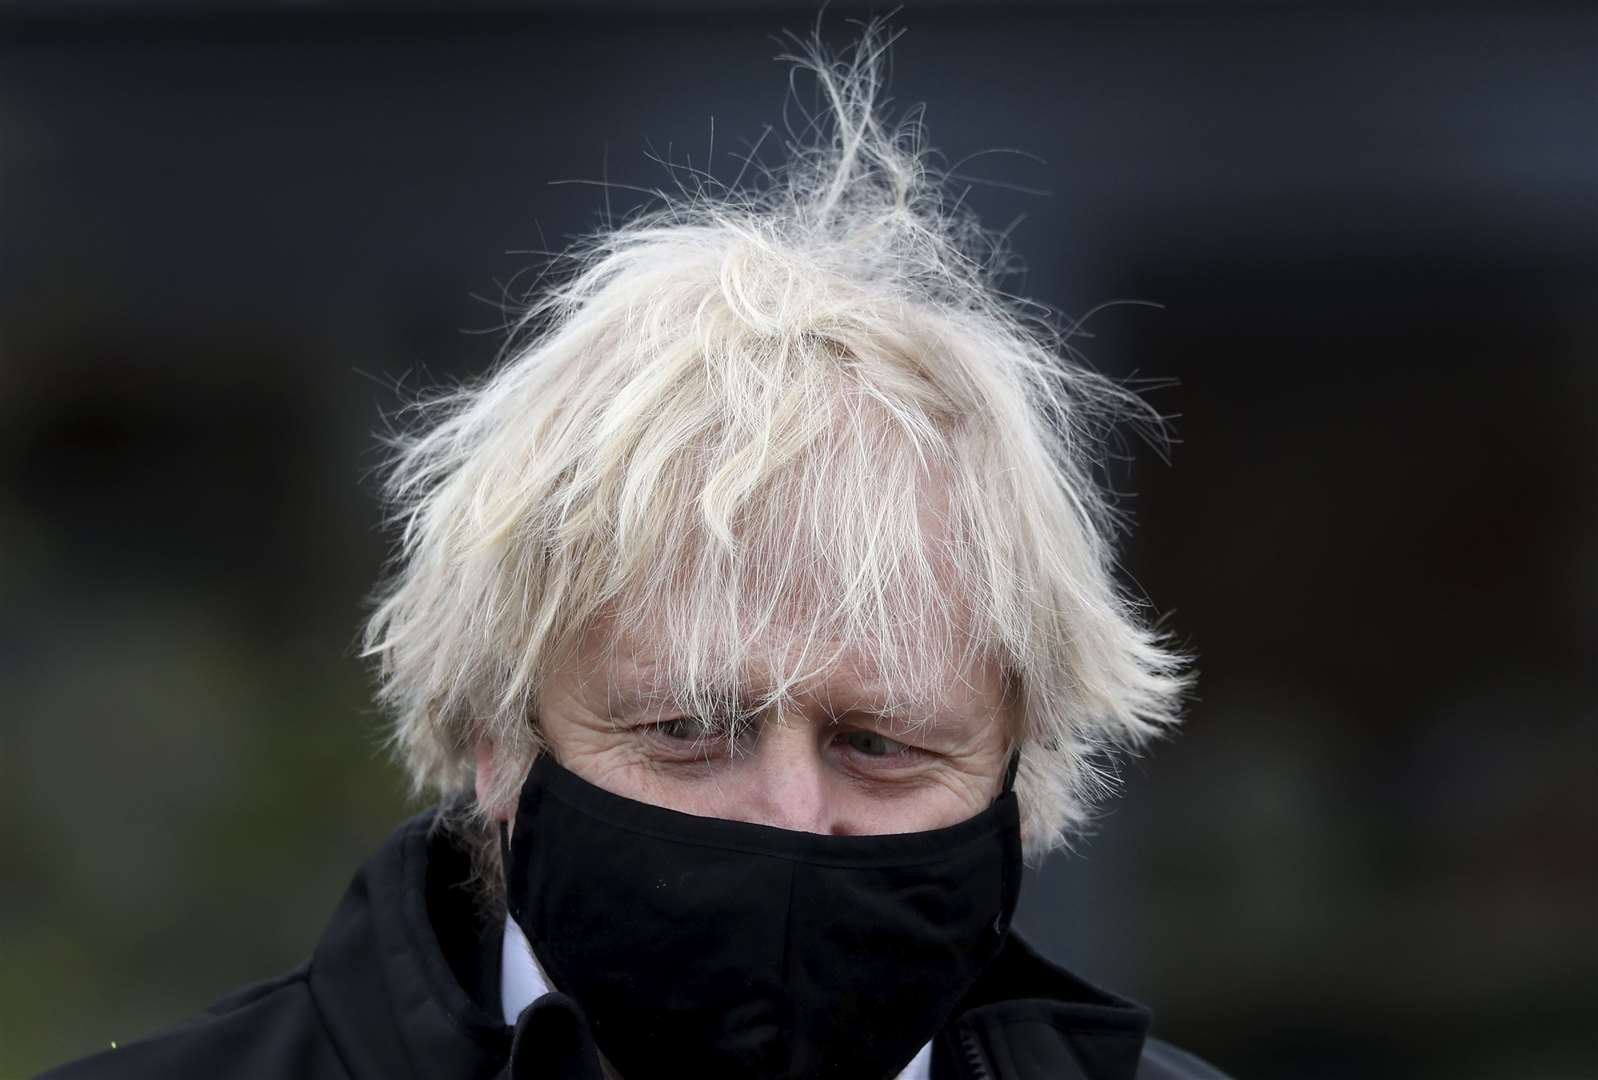 Boris Johnson has said that more work needs to be done to tackle ‘very serious issues’ of racism in Britain (Scott Heppell/PA)